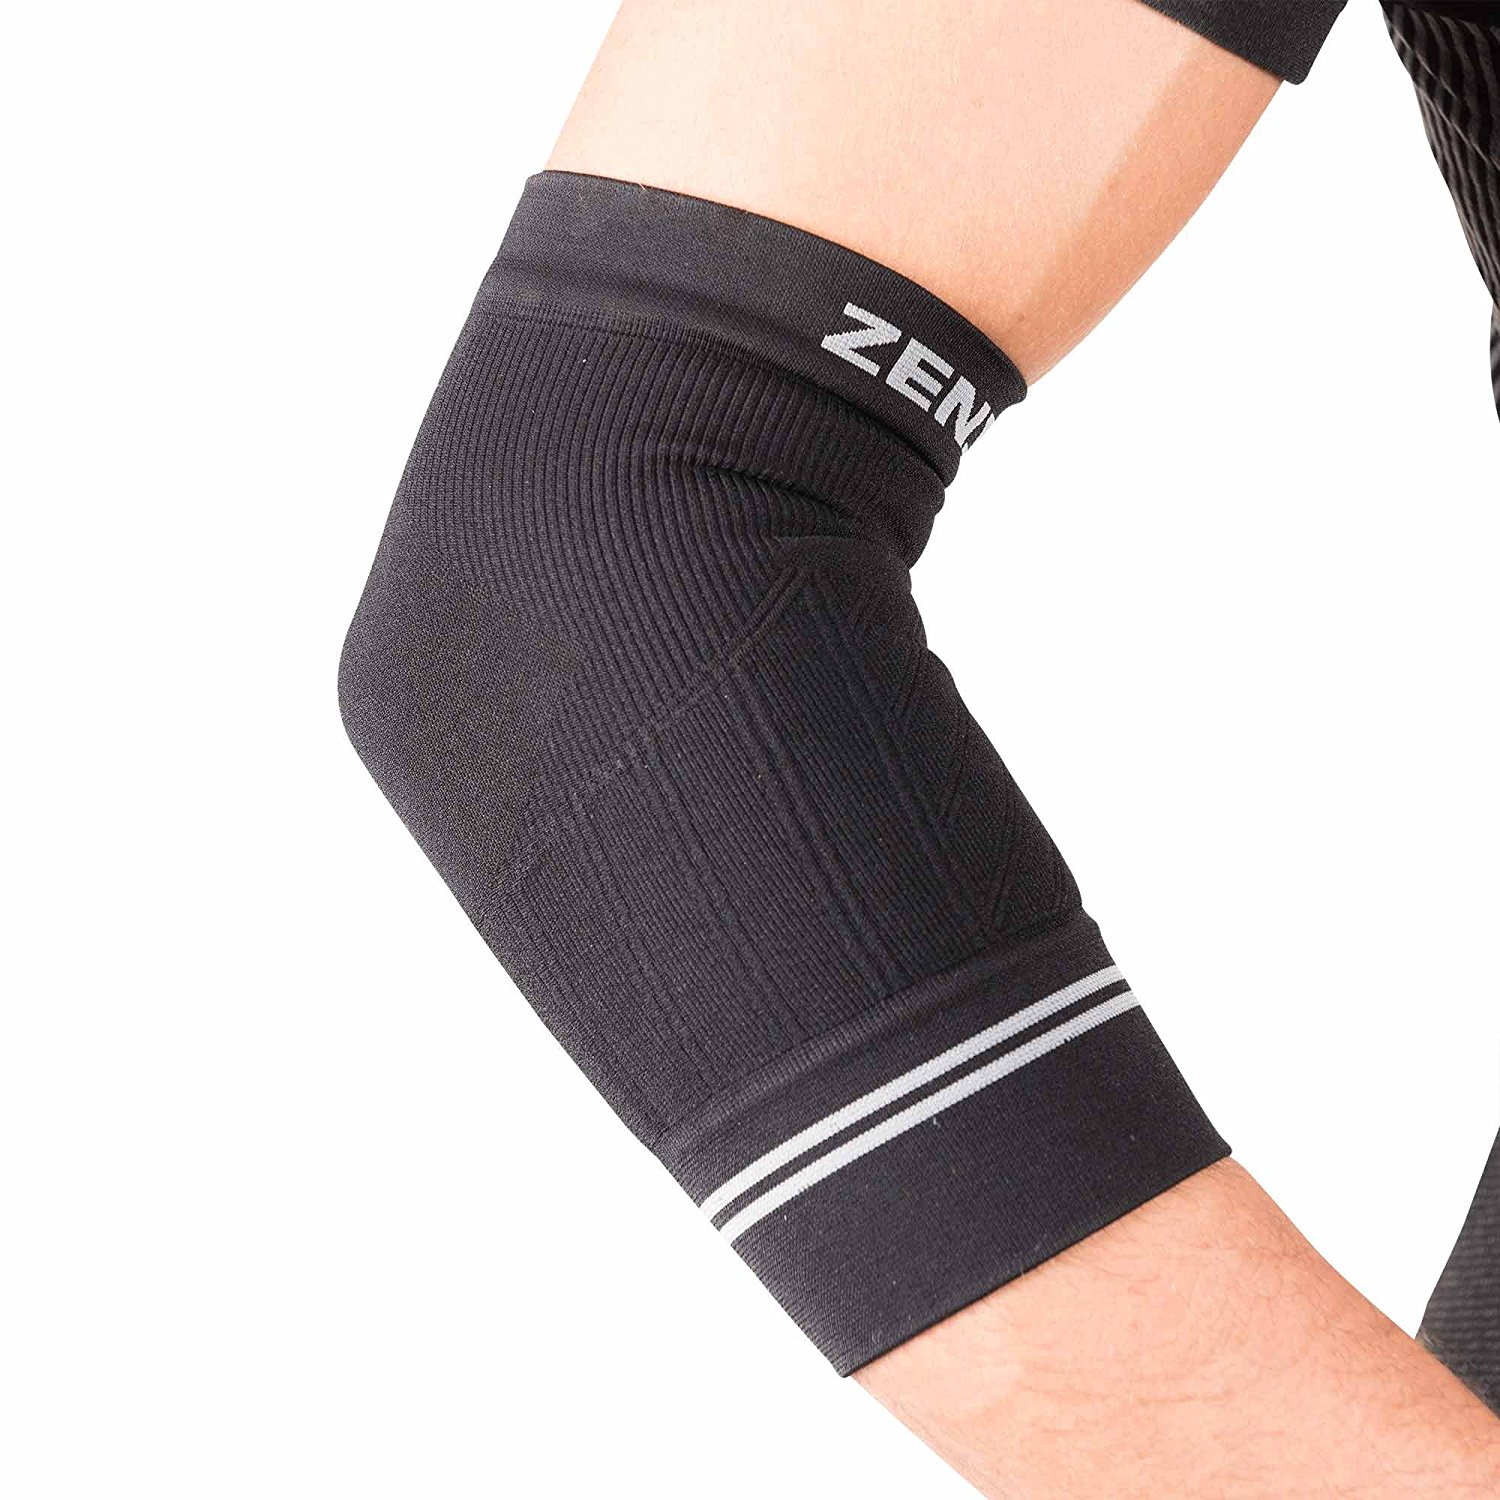 Compression for Elbow Tendonitis - If you'd prefer a less bulky brace for your elbow pain, we recommend this brace to use when doing activities that increase your symptoms. We've had a few clients swear by using these for their continuous typing/desk work. 